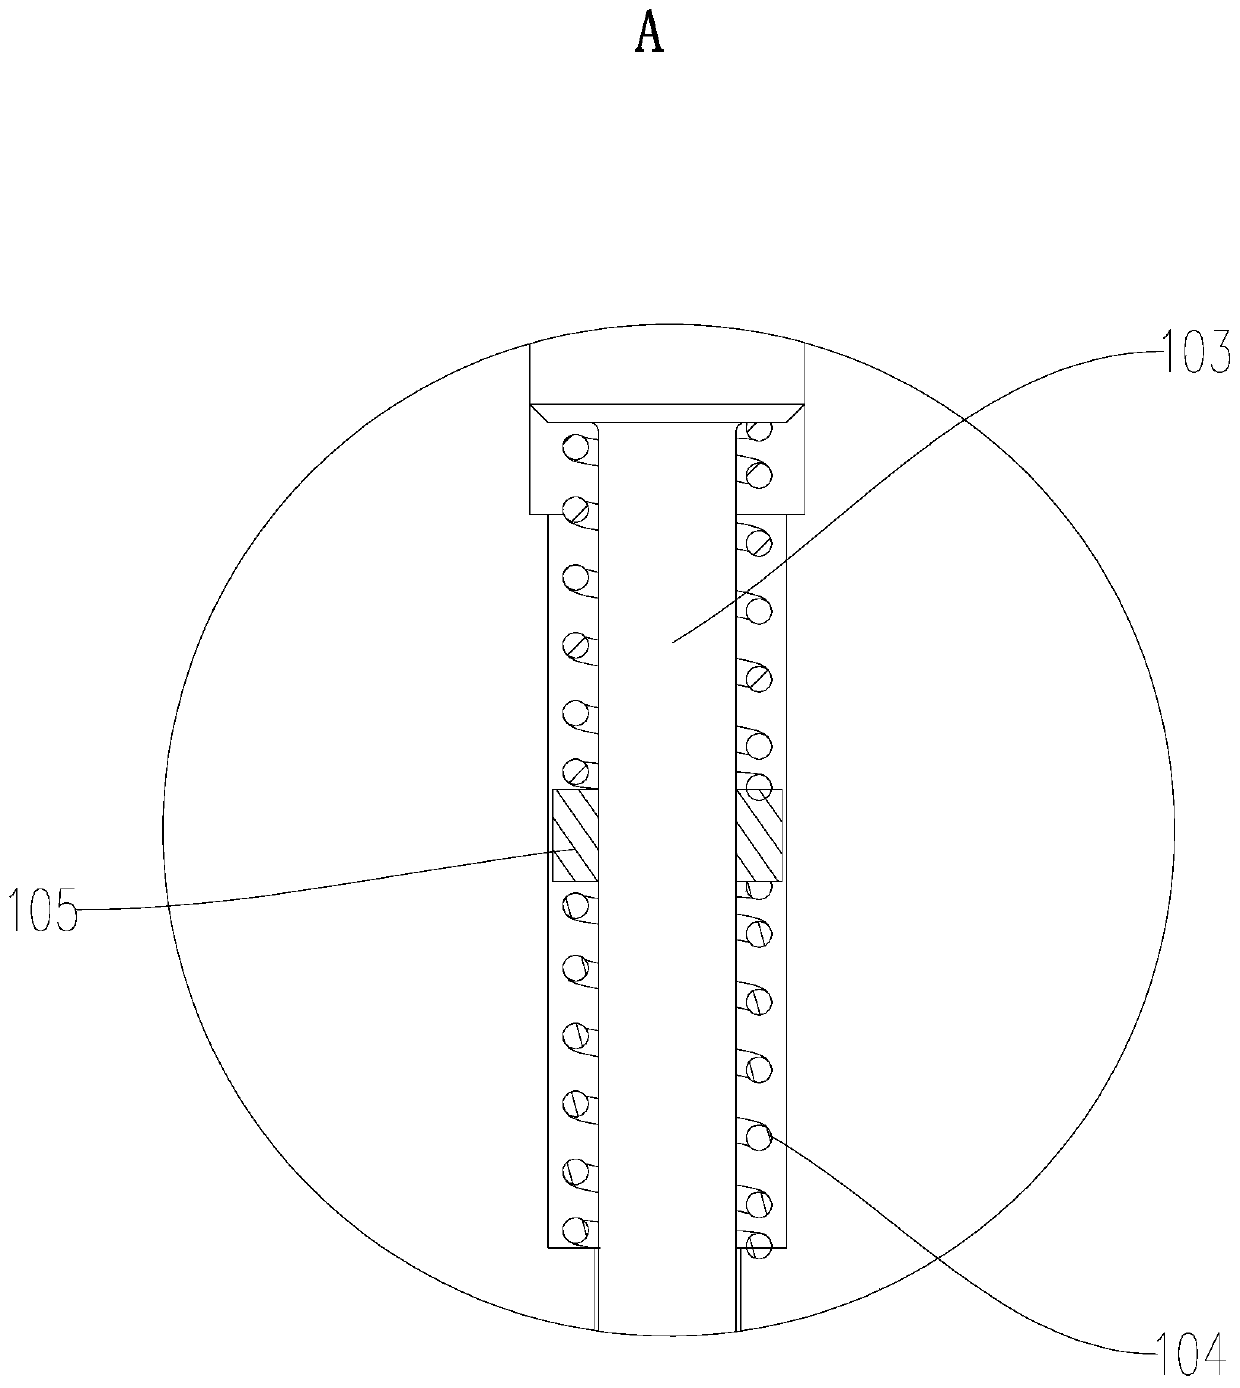 Locking mechanism and spindle structure